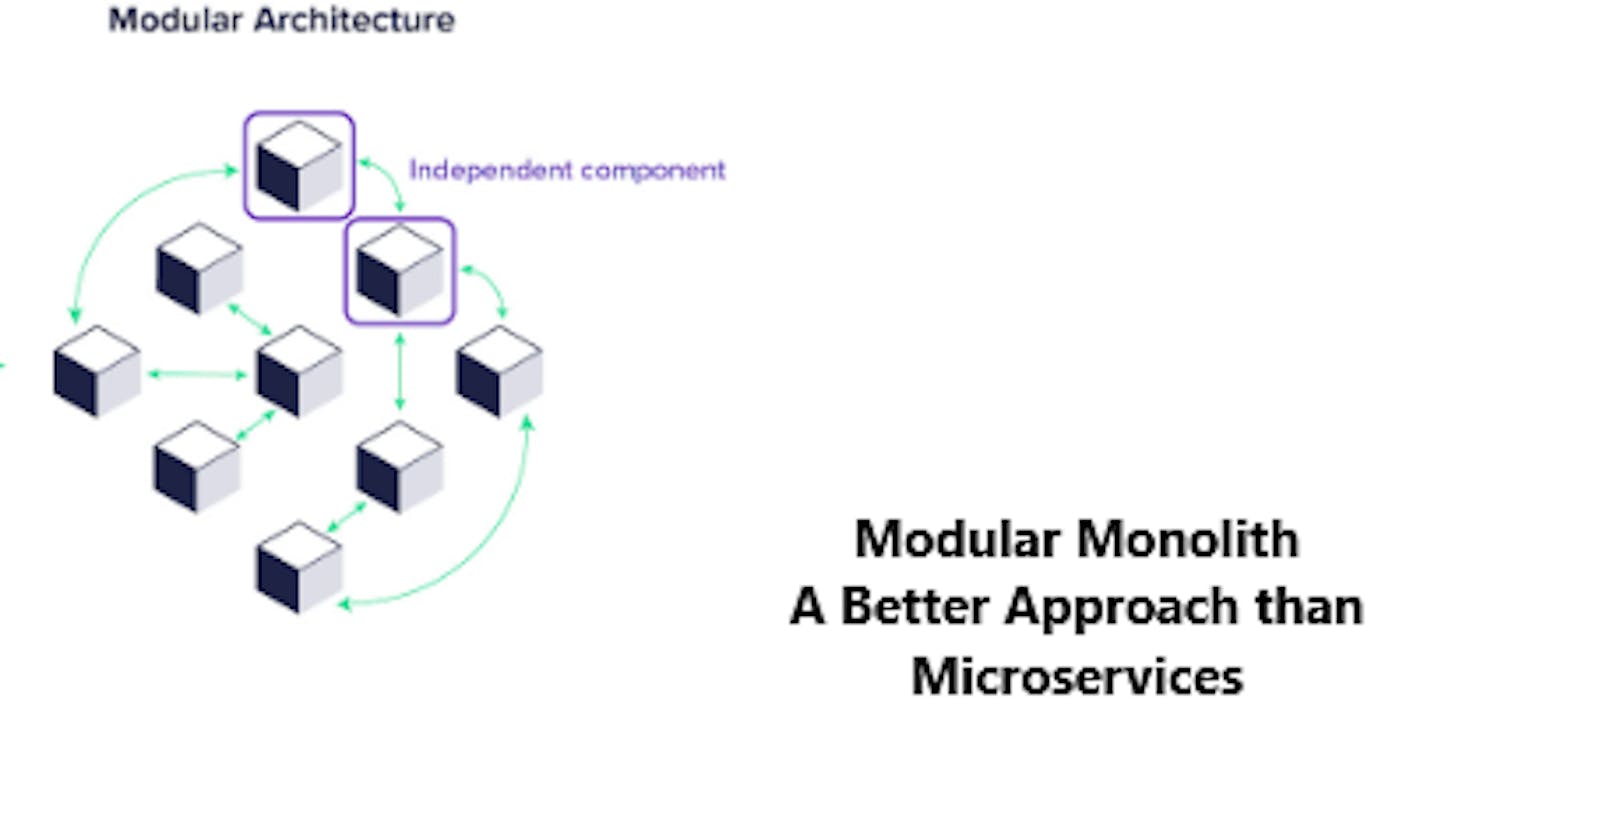 The Modular Monolith - Why It's Better Than Microservices